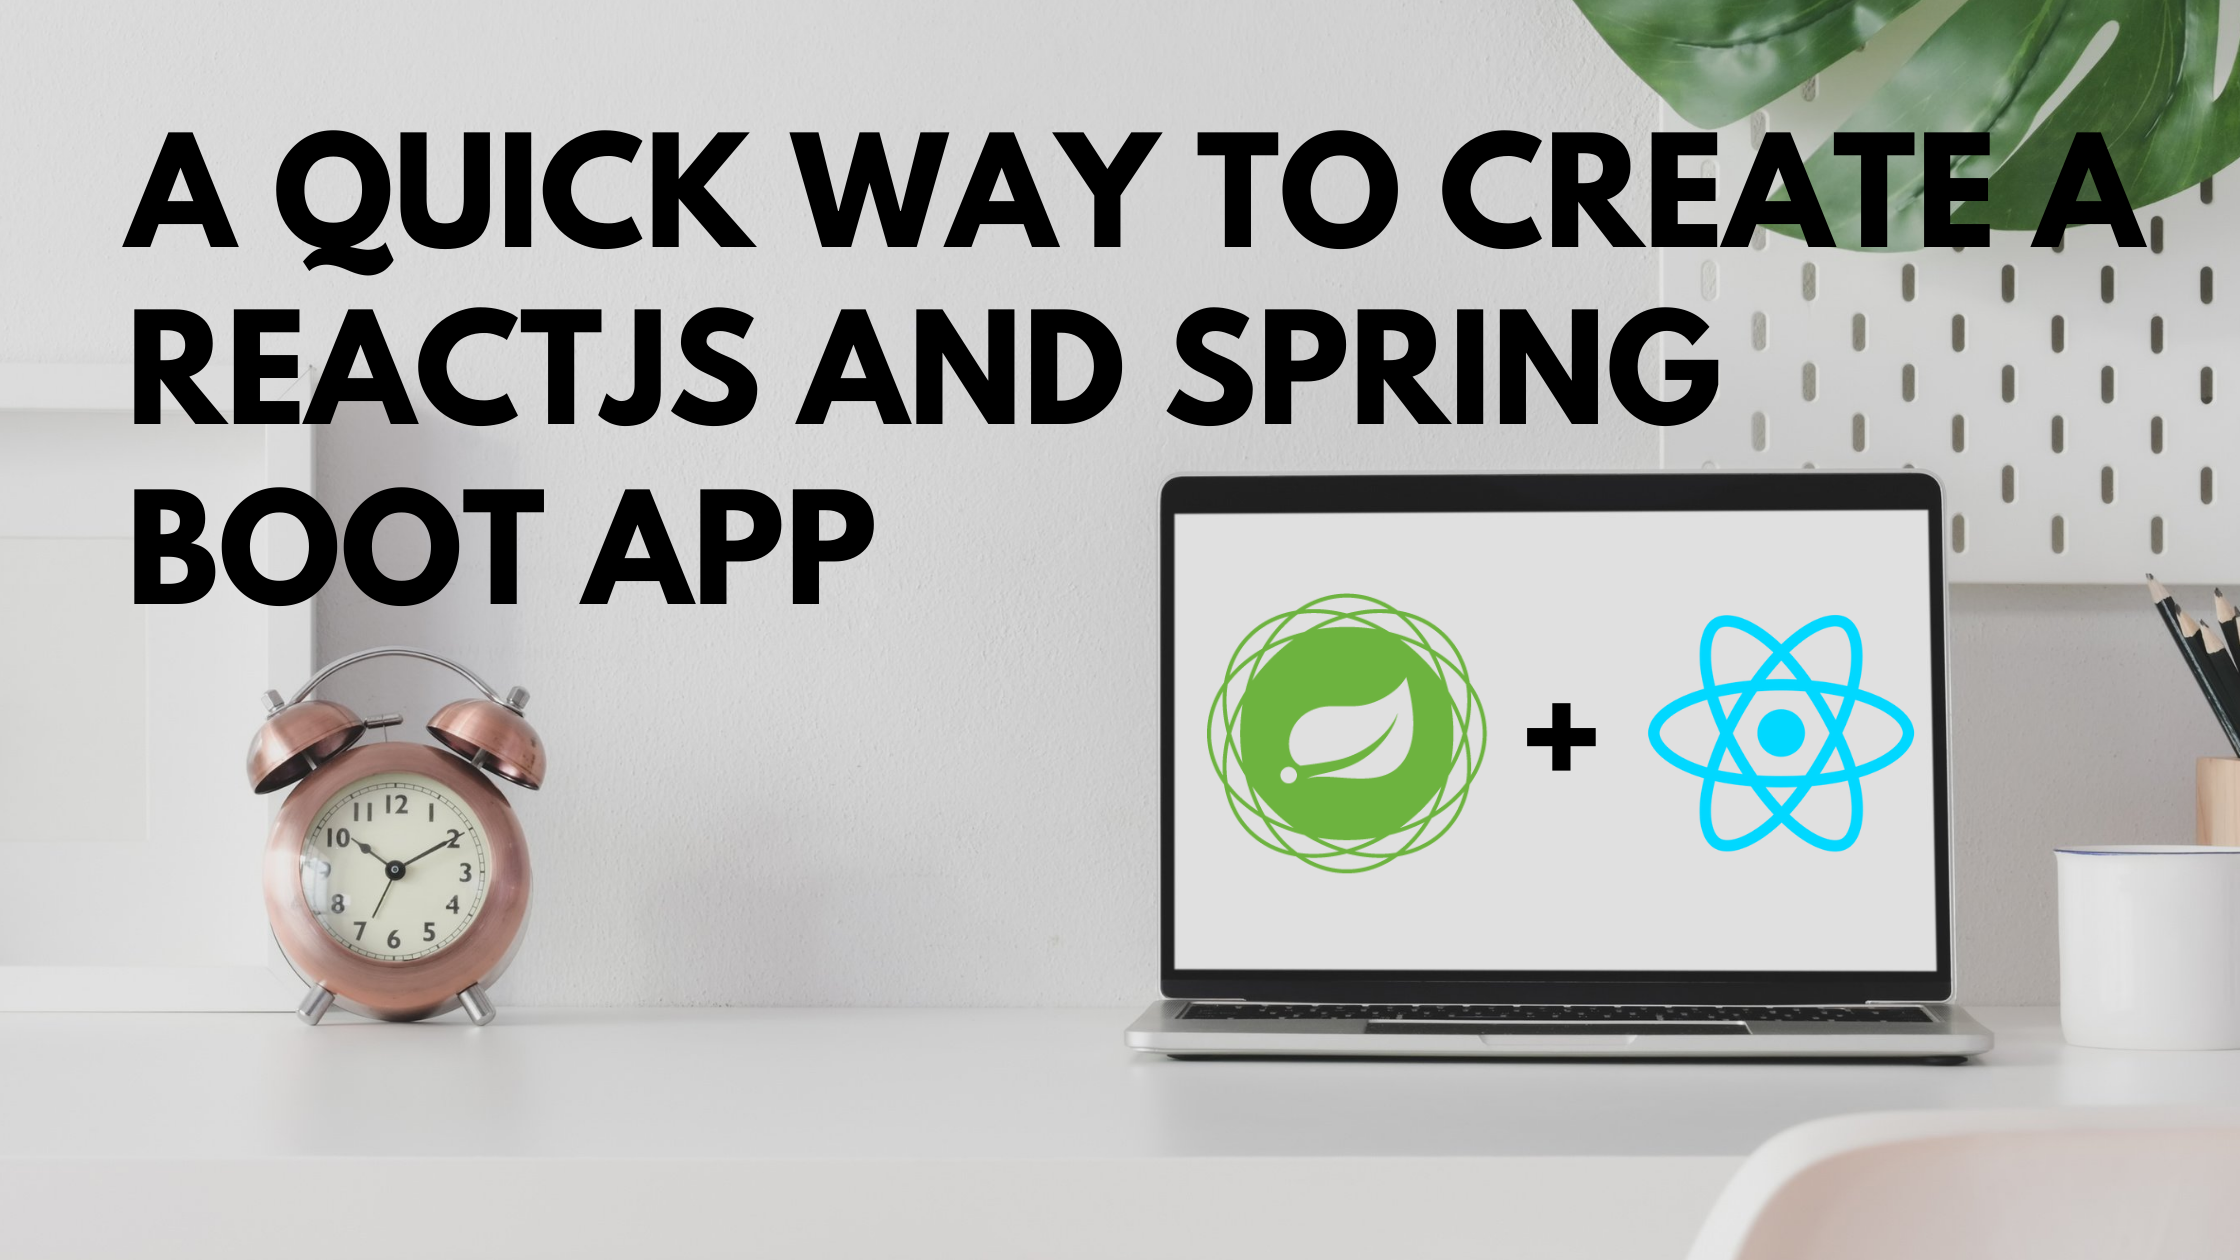 A quick way to create a ReactJS and Spring Boot app